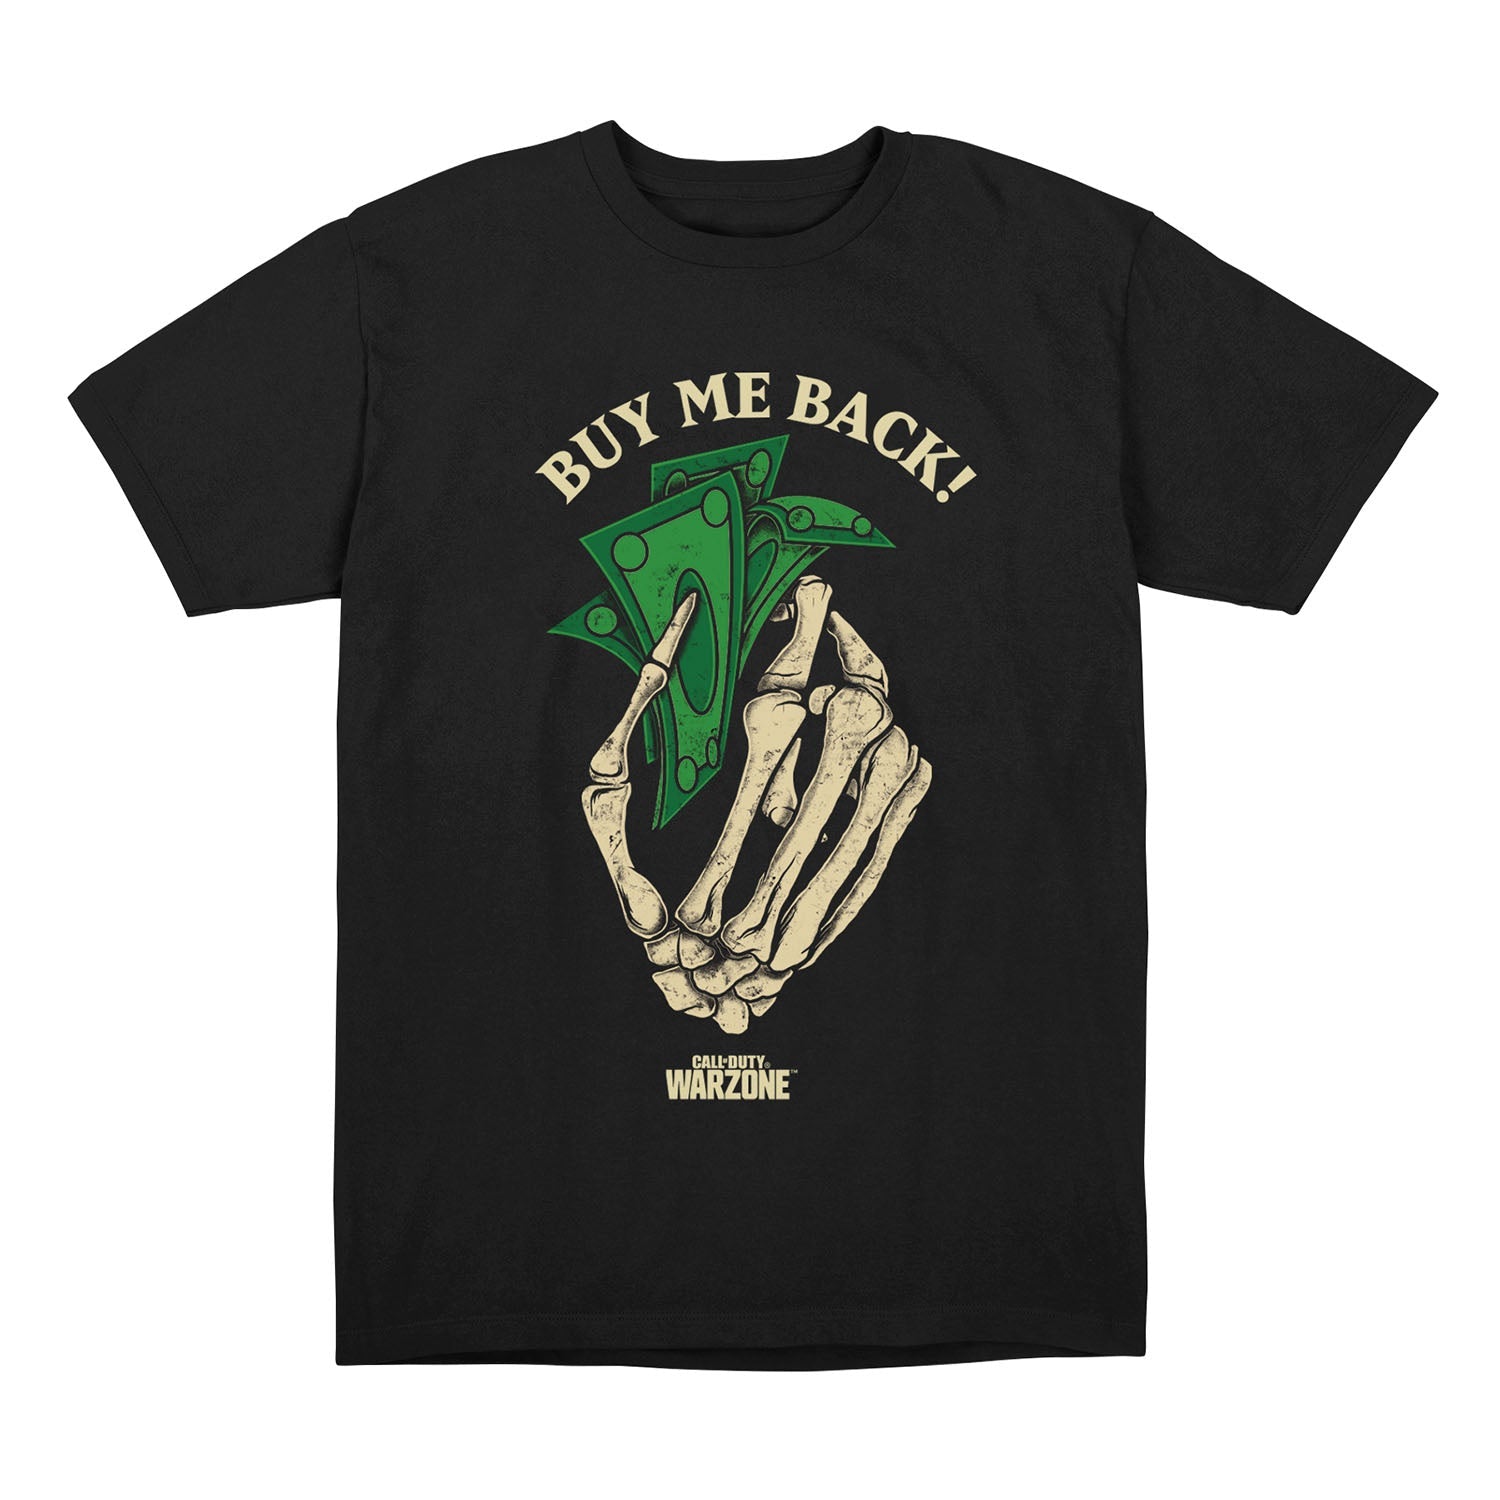 Call of Duty Black Buy Me Back T-Shirt - Front View